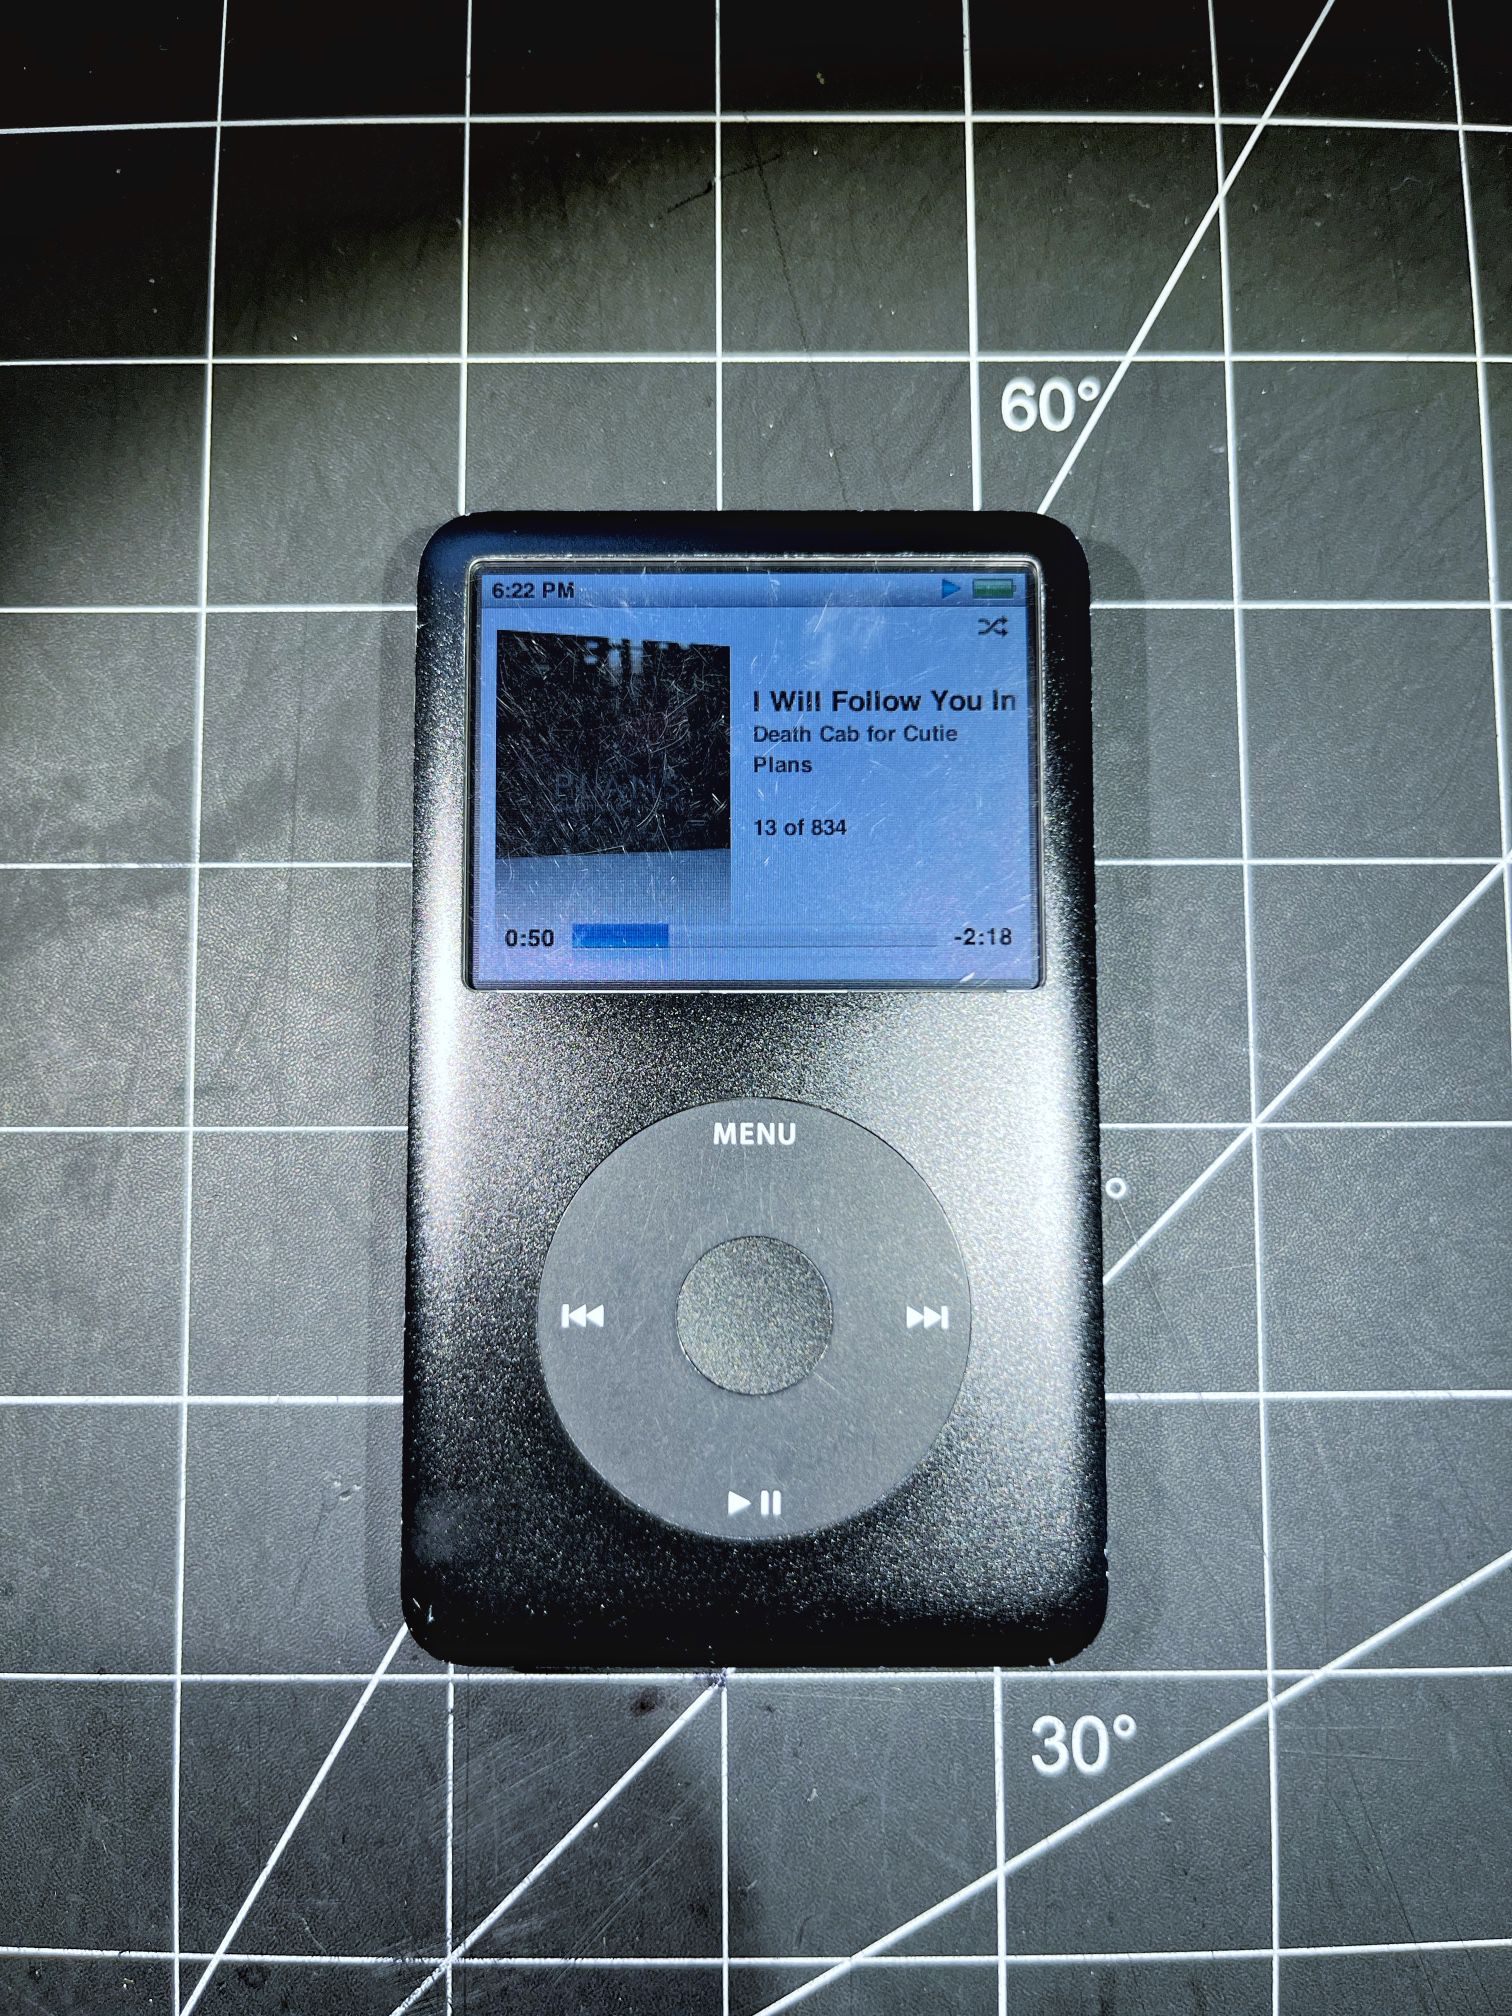 Apple iPod Classic 80gb for Sale in Pasadena, CA OfferUp